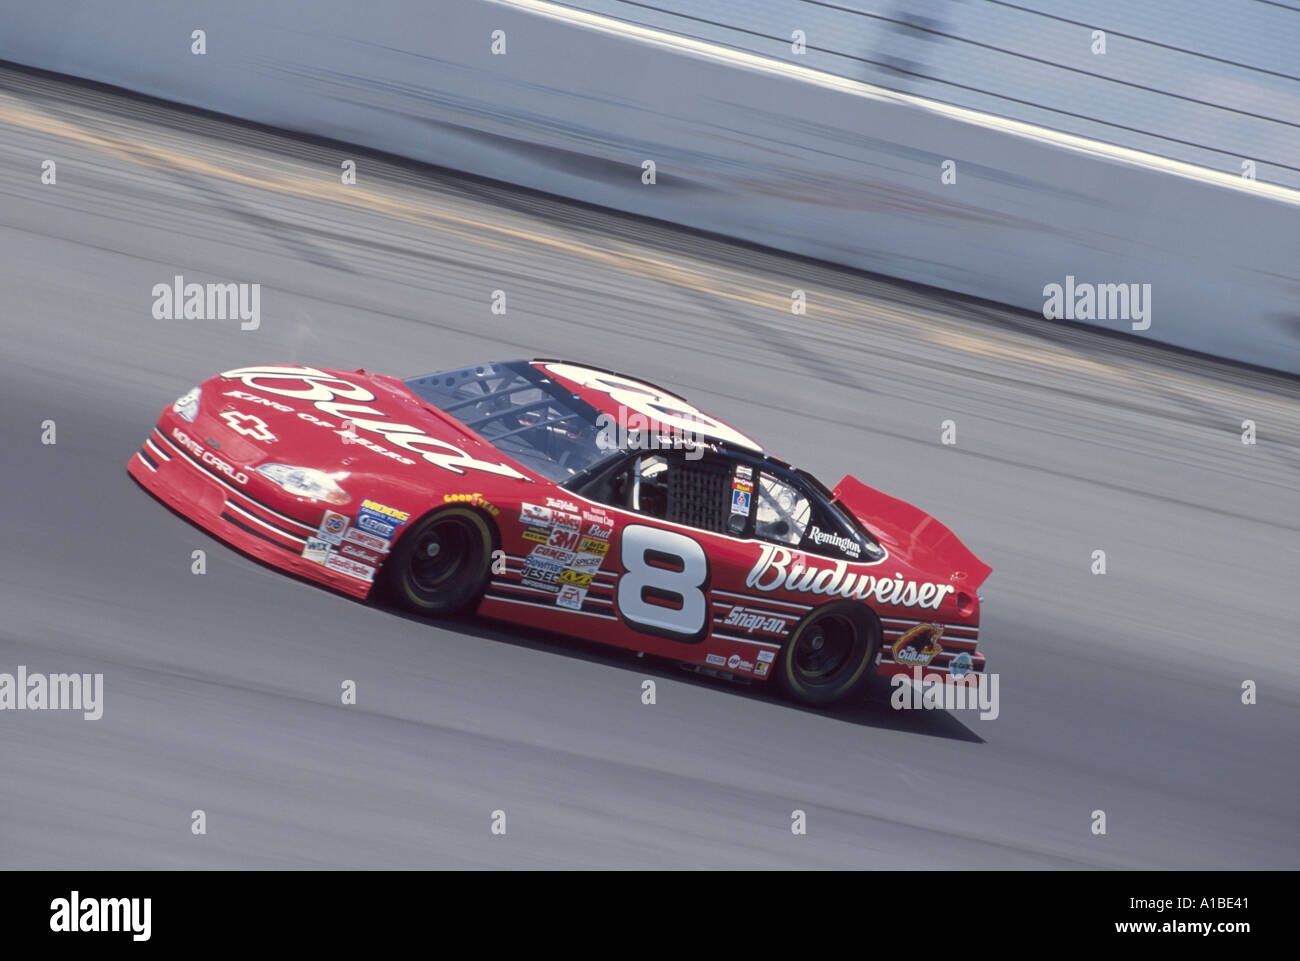 Dale Earnhardt Jr races at Chicagoland Speedway 2001 Stock Photo